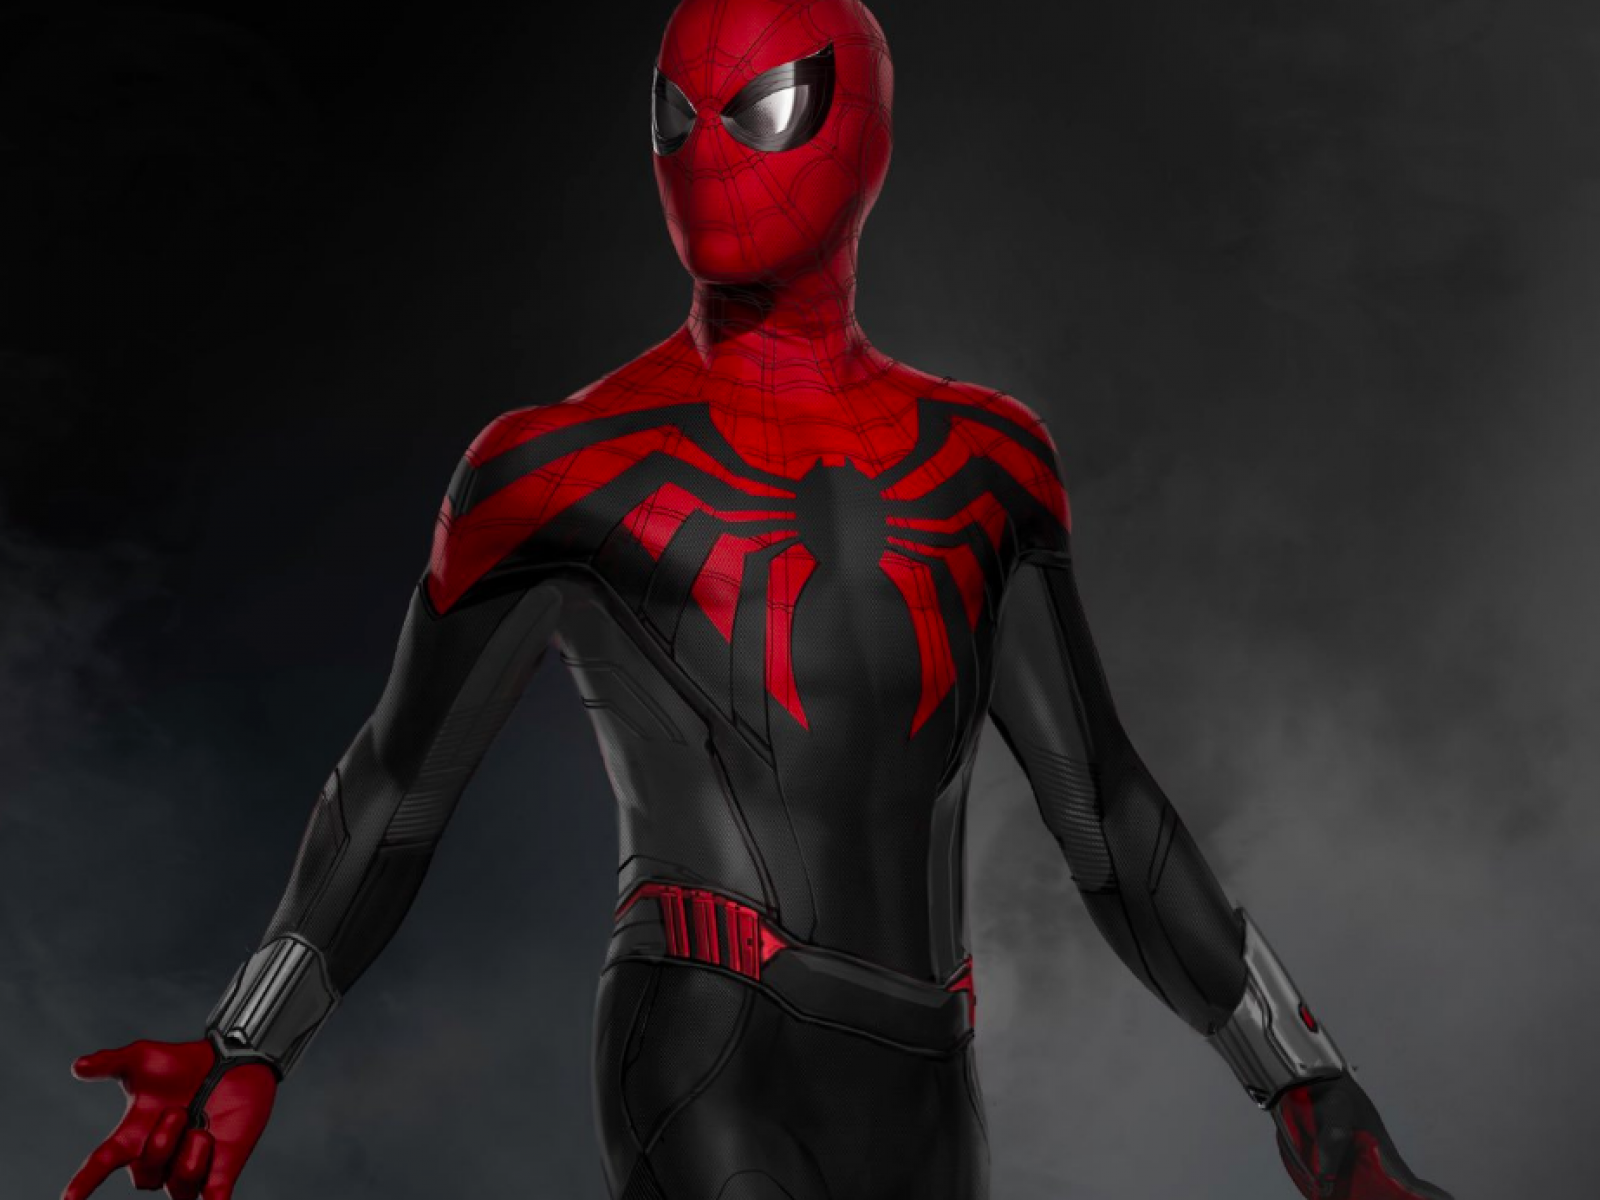 Black And Red Spider Man Suit Debuts On Far From Home Set Images, Photos, Reviews